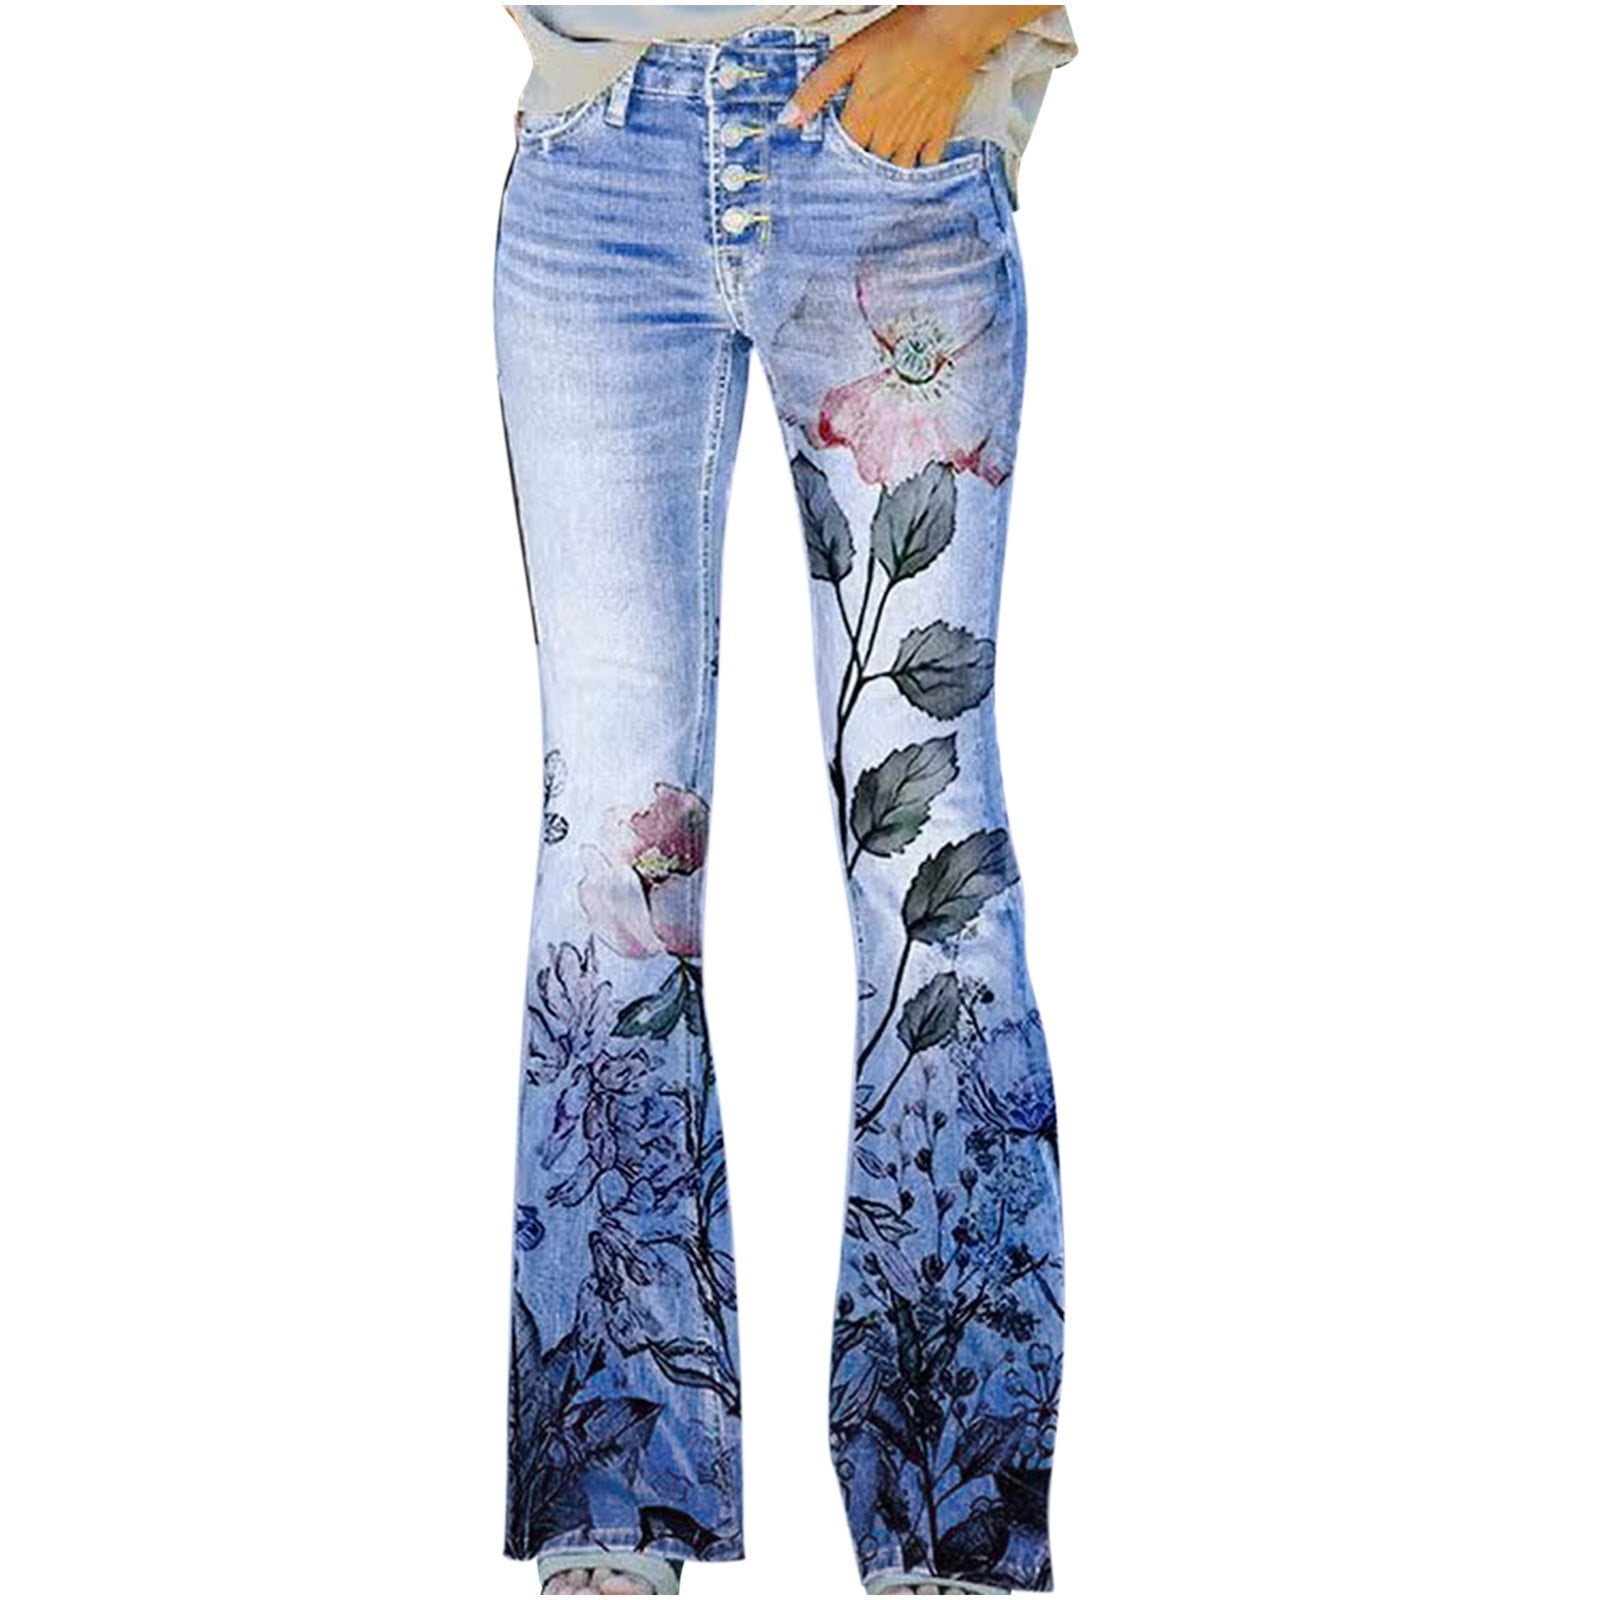 YYDGH Womens Bell Bottom Jeans High Waist Floral Embroidered Faux Denim ...